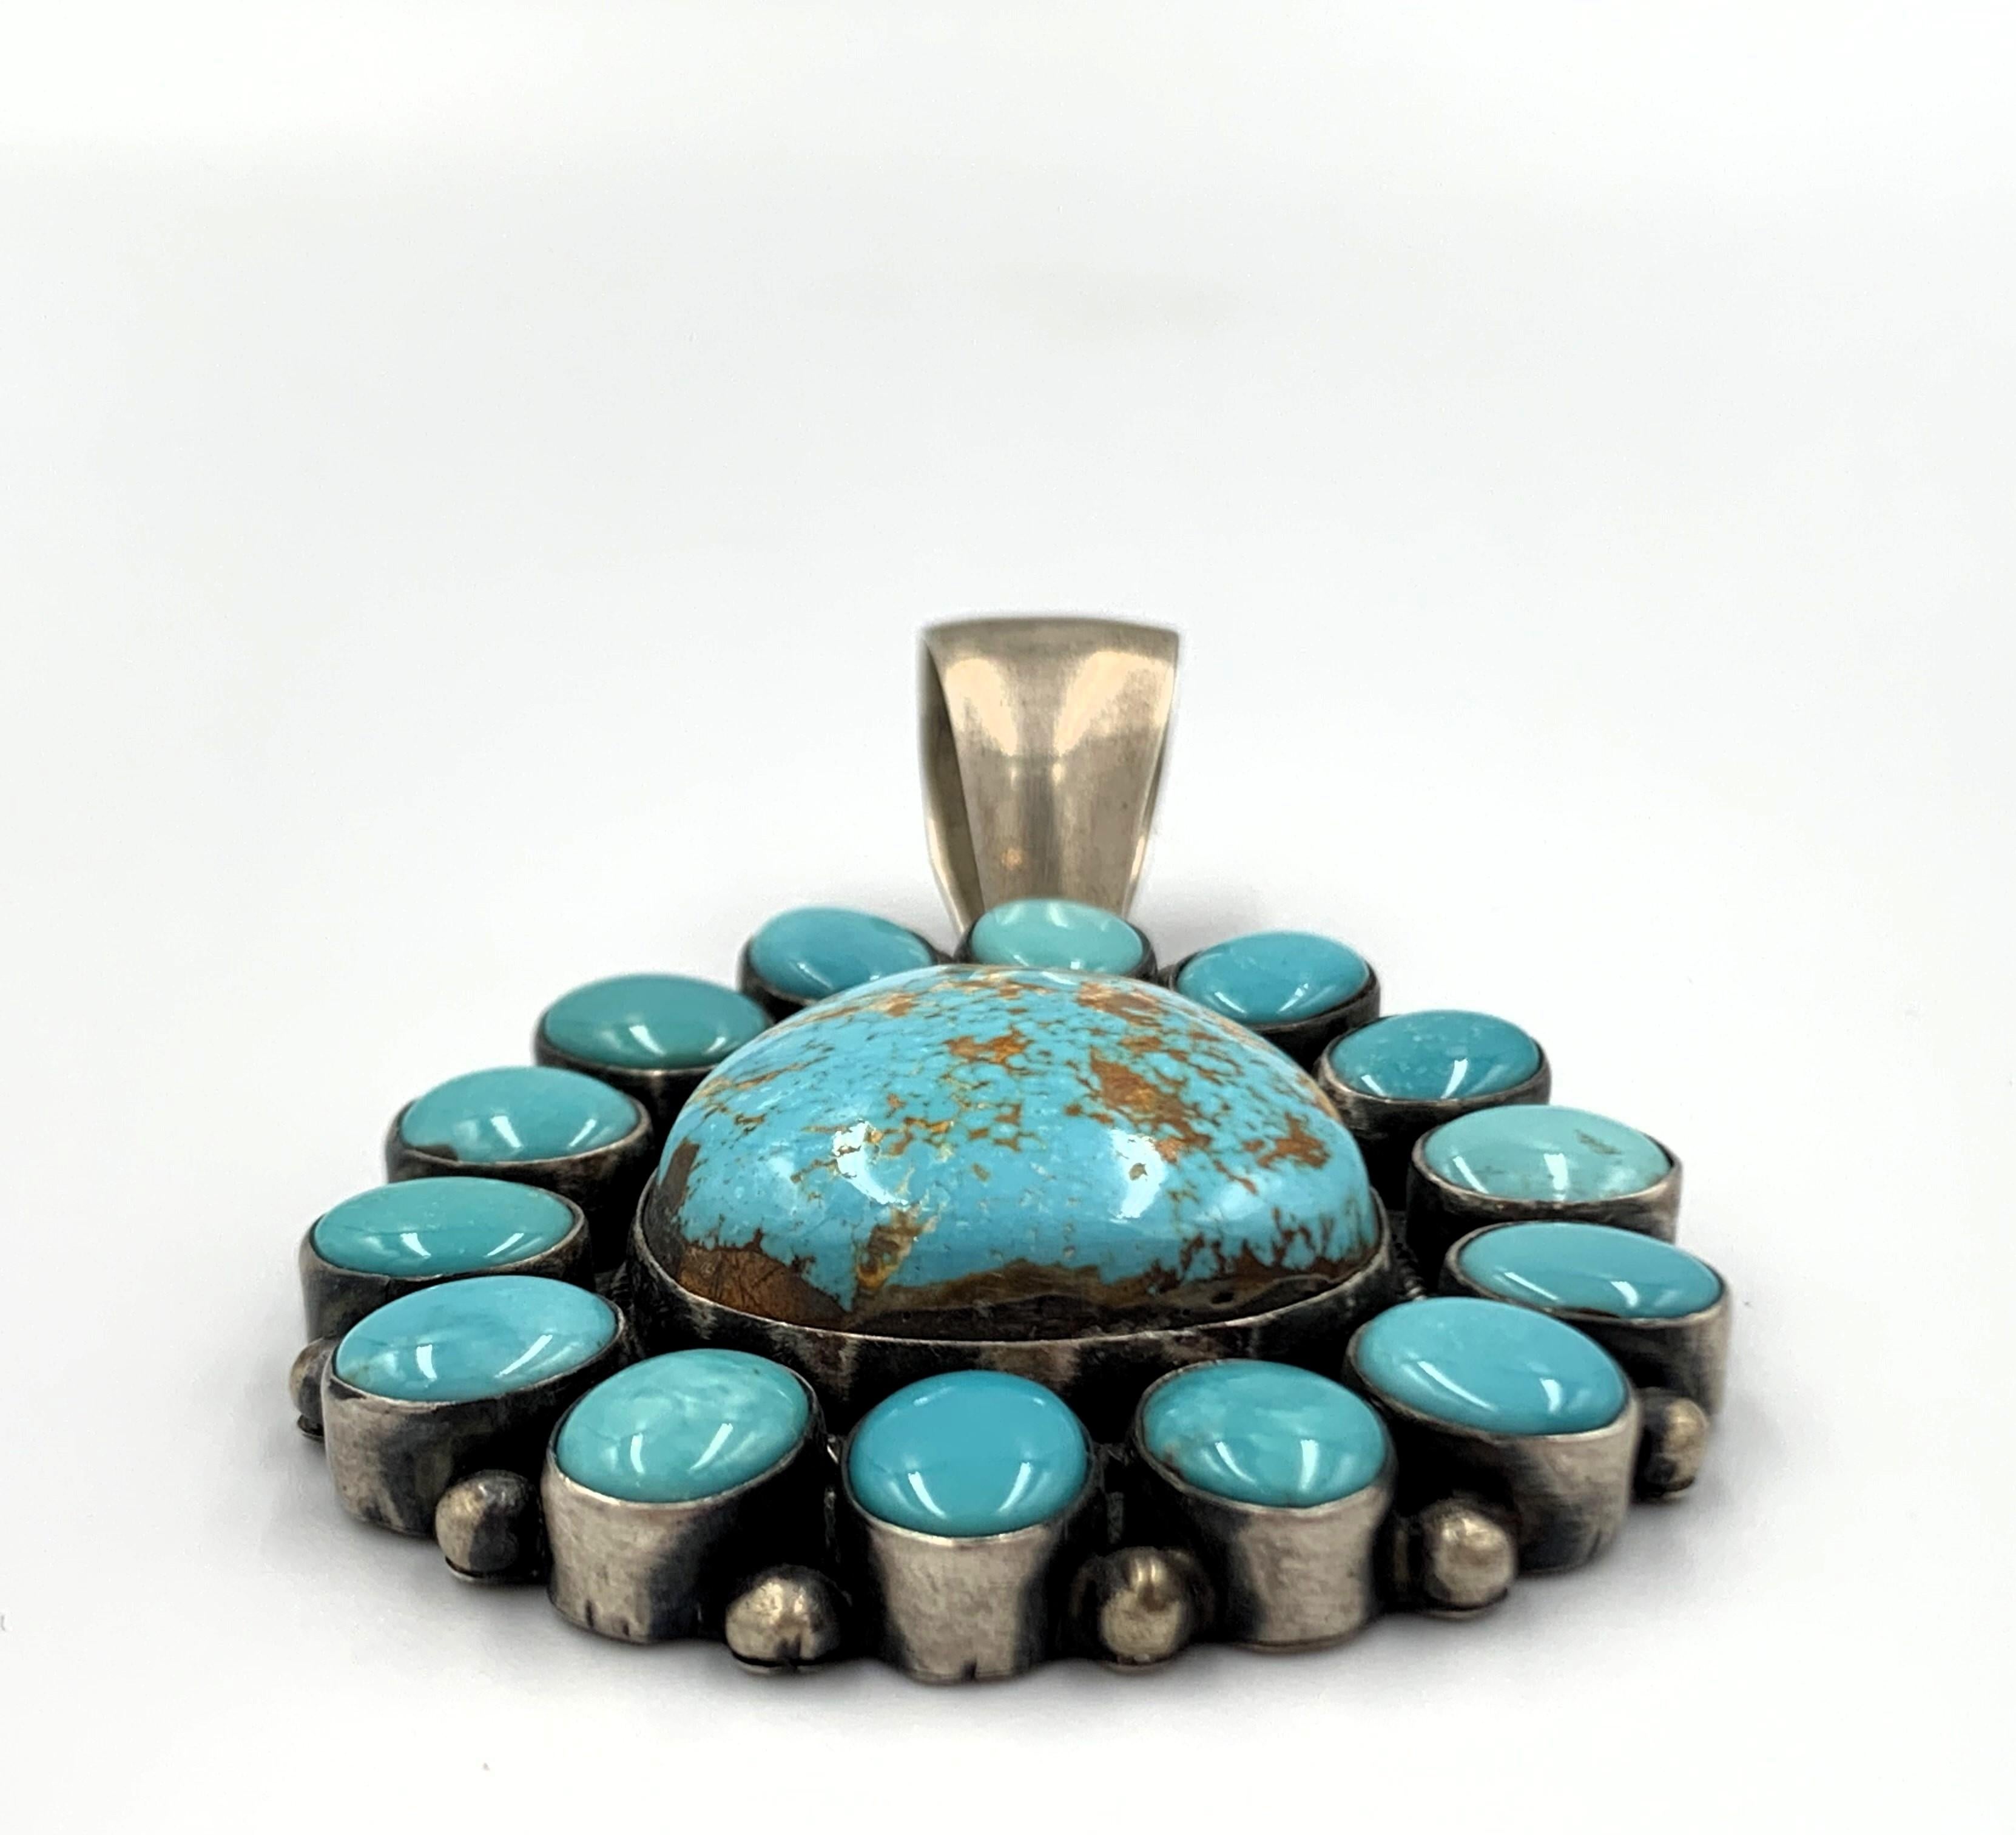 Sterling silver pendant by Navajo silversmith Bea (Betty) Tom. The 2” x 2” pendant with a 3/4” bale has 14 Carico Lake turquoise cabochons surrounding a 1” x 1 1/8 Carico Lake turquoise stone. Hallmarked  